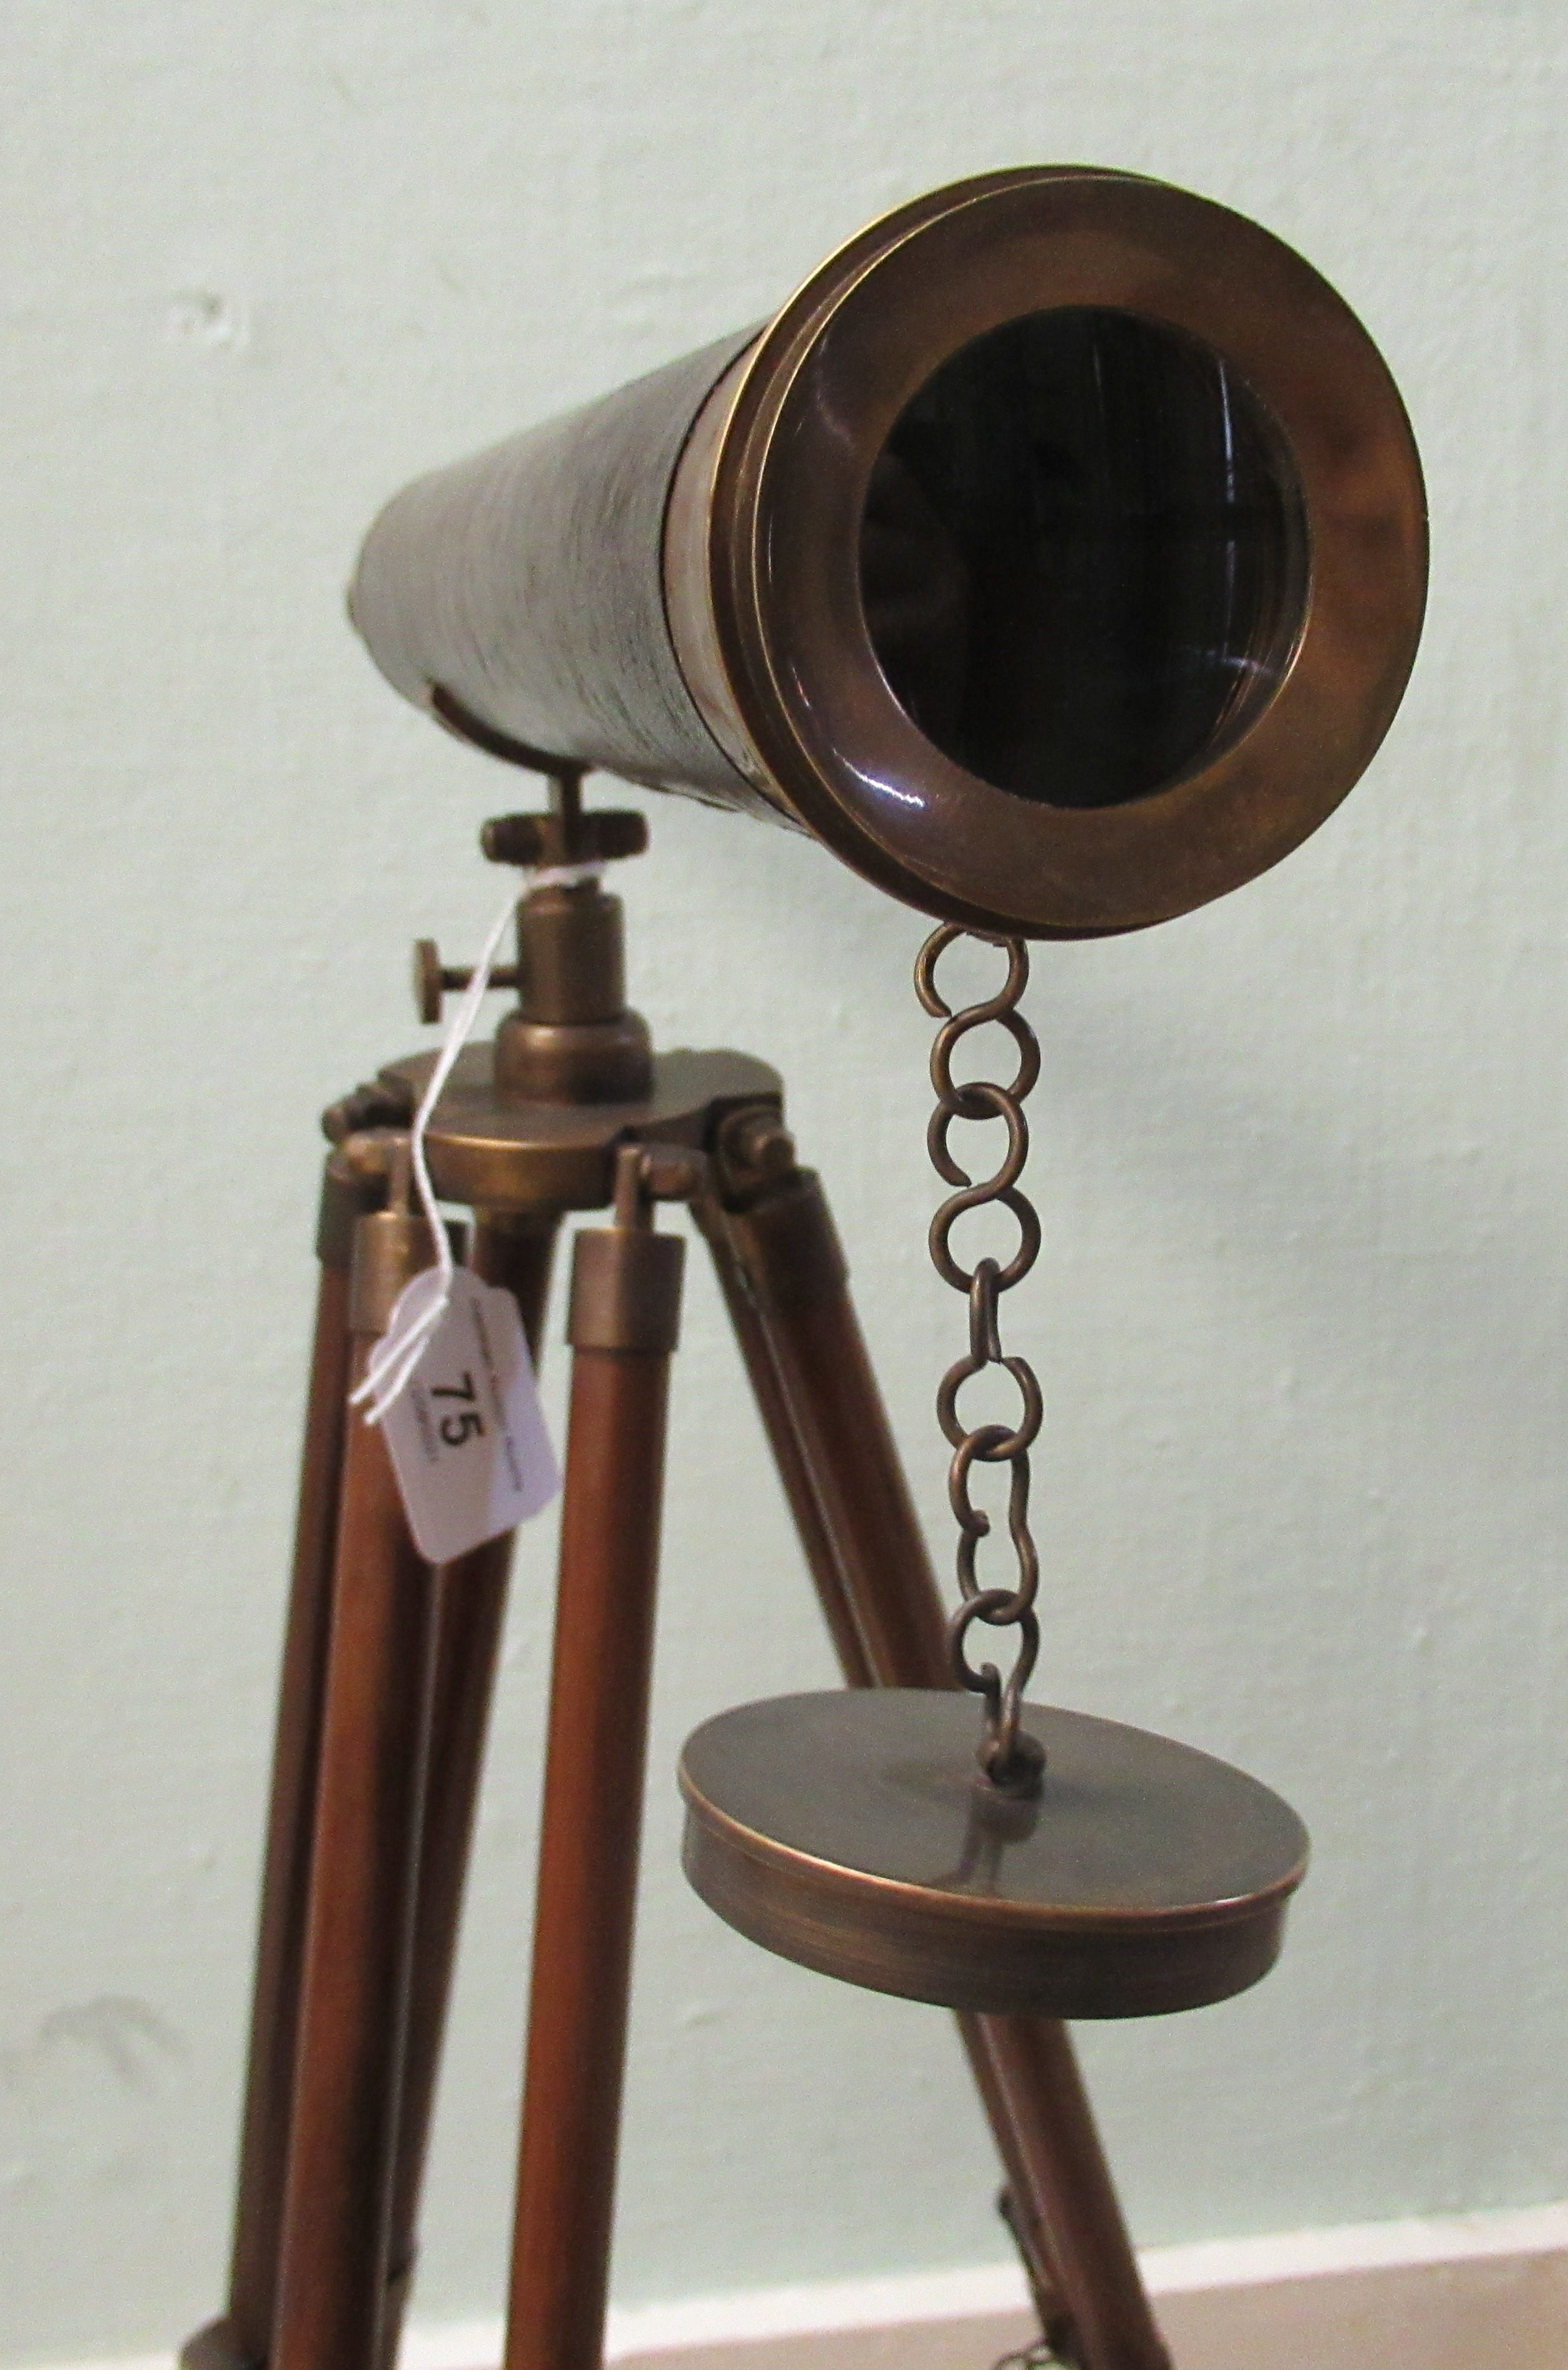 A modern reproduction of a 19thC brass telescope, on a tripod stand  26"h - Image 3 of 3